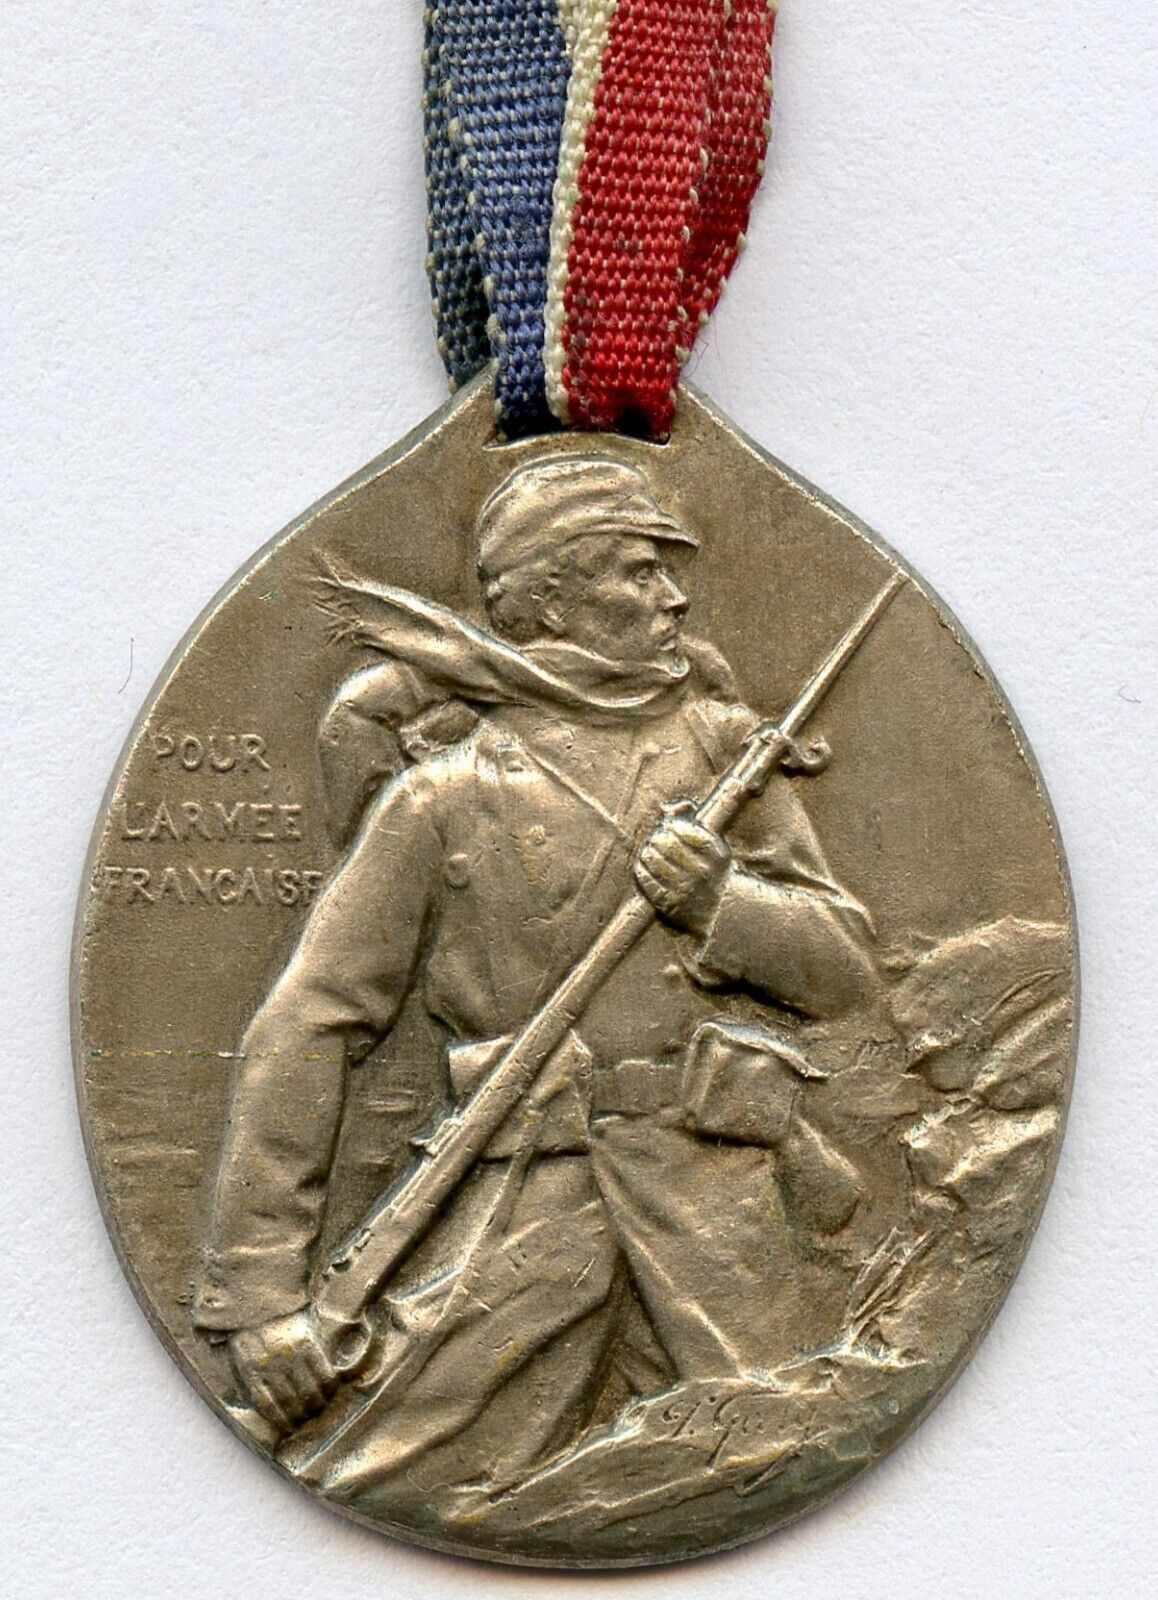 France WWI 1914-1915 Dijon Charity Committee Medal 28mm 